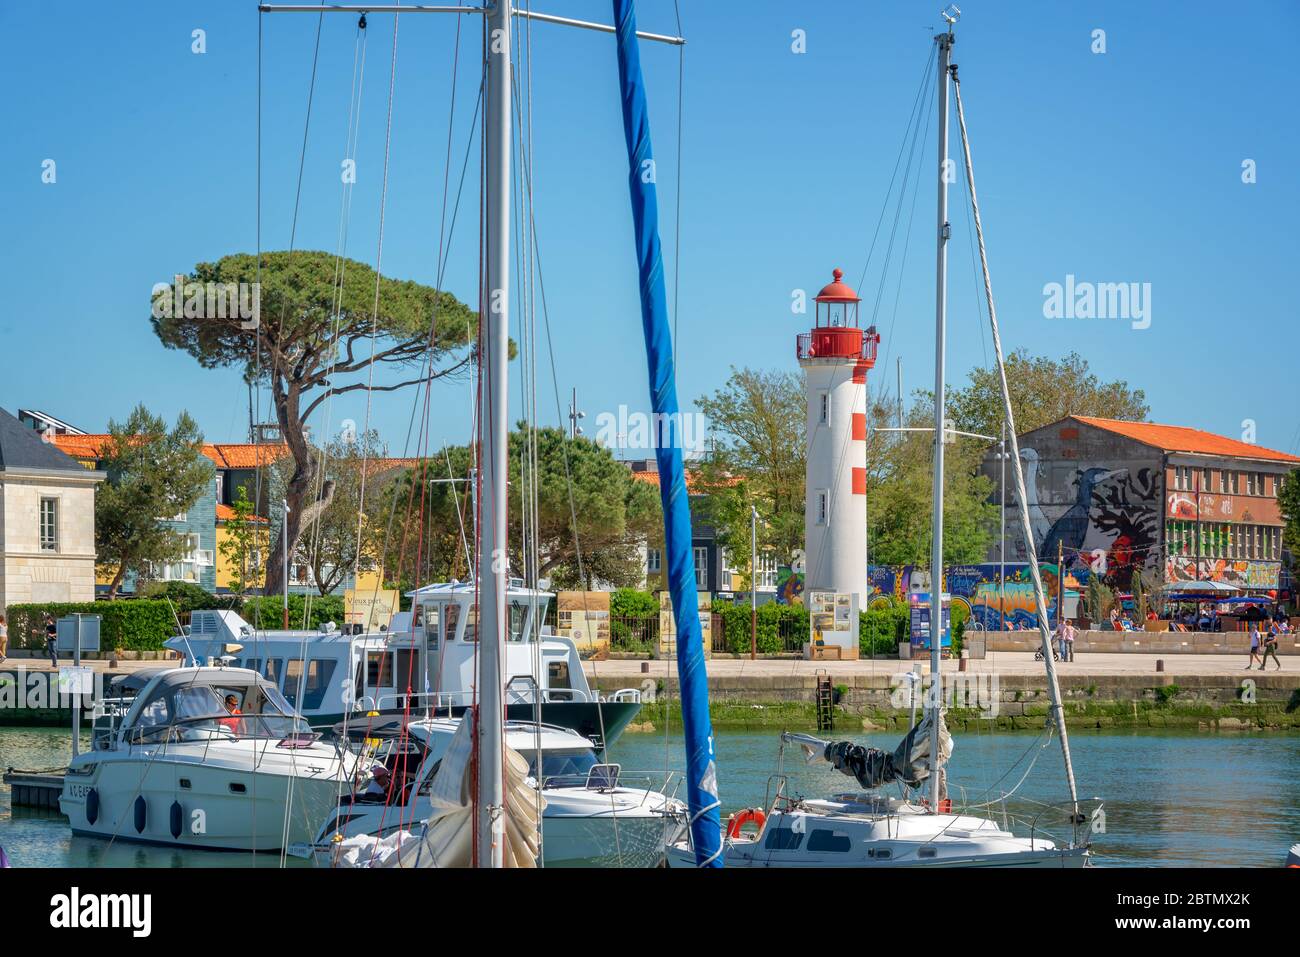 Red lighthouse and sailboats in the old harbor of La rochelle, France Stock Photo